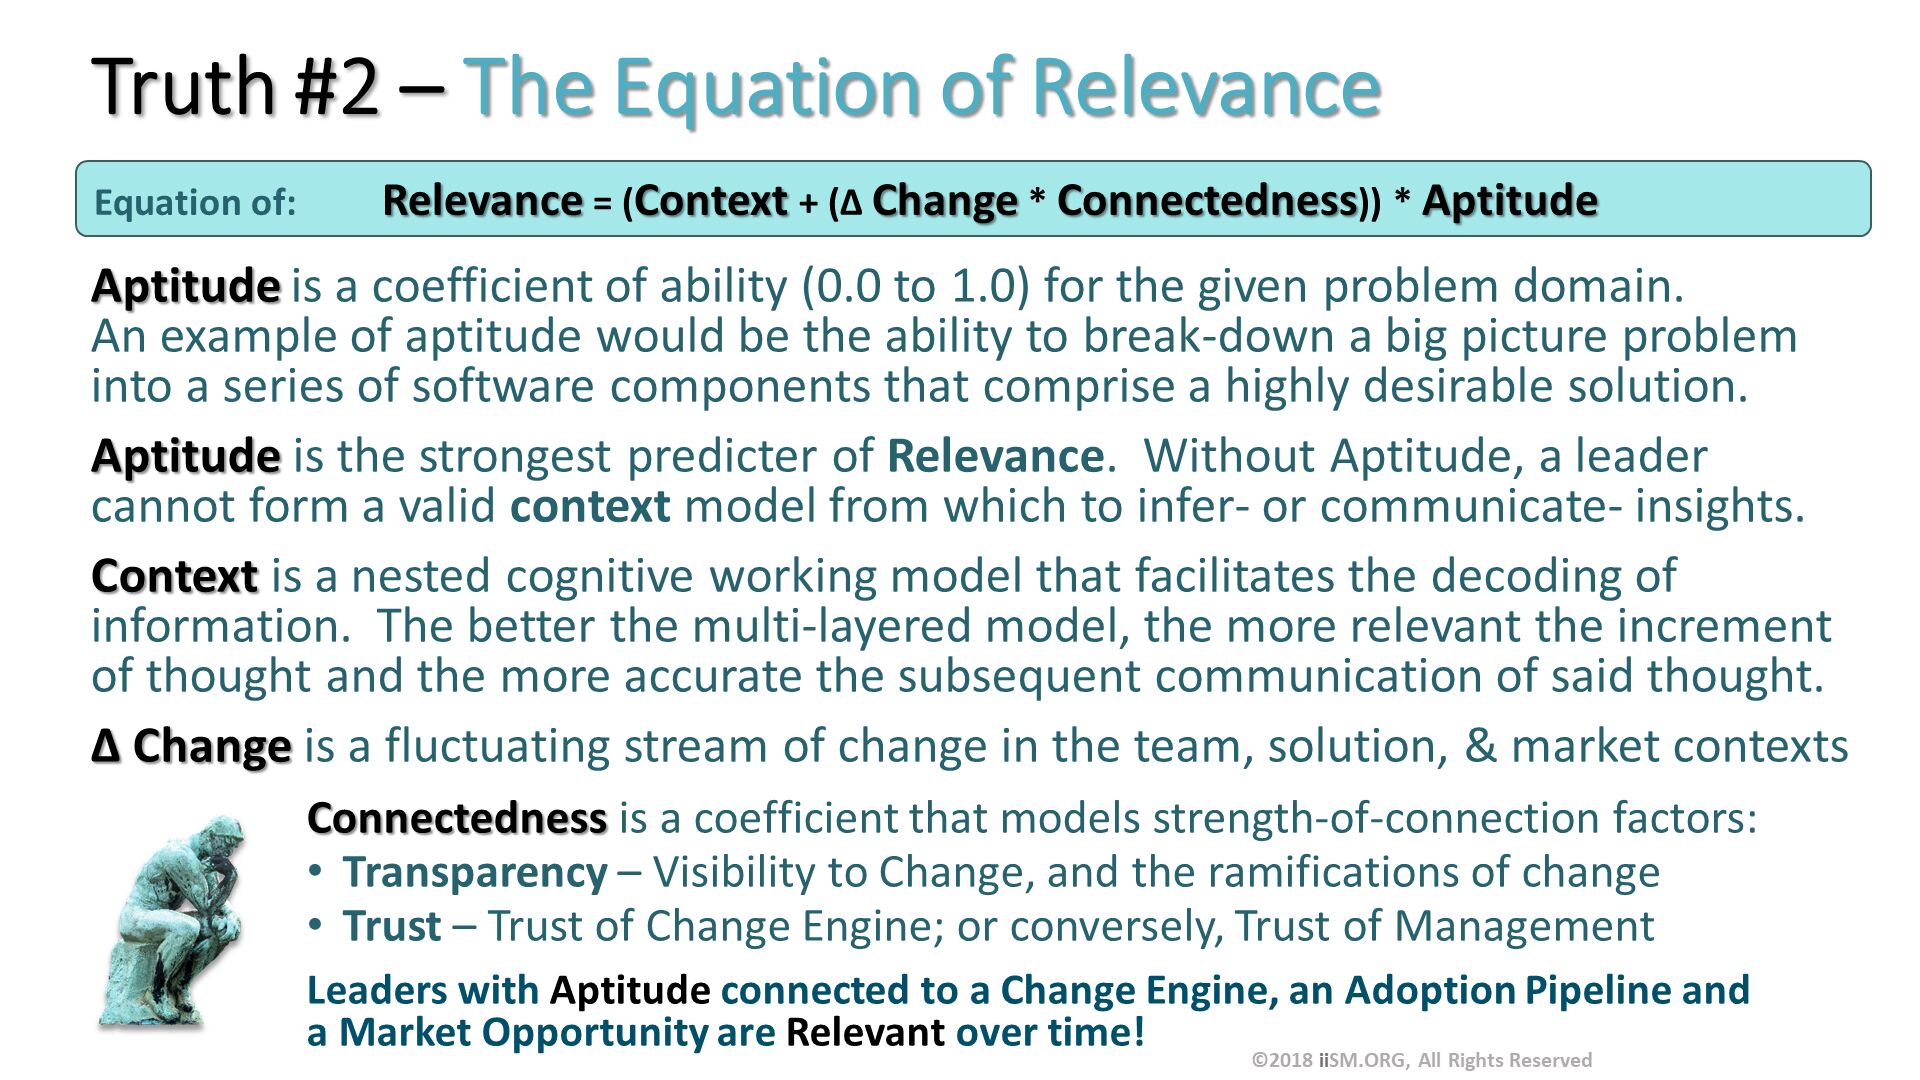 Truth #2 – The Equation of Relevance . Aptitude is a coefficient of ability (0.0 to 1.0) for the given problem domain.An example of aptitude would be the ability to break-down a big picture problem into a series of software components that comprise a highly desirable solution.
Aptitude is the strongest predicter of Relevance.  Without Aptitude, a leader cannot form a valid context model from which to infer- or communicate- insights.
Context is a nested cognitive working model that facilitates the decoding of information.  The better the multi-layered model, the more relevant the increment of thought and the more accurate the subsequent communication of said thought. 
∆ Change is a fluctuating stream of change in the team, solution, & market contexts
Connectedness is a coefficient that models strength-of-connection factors:
Transparency – Visibility to Change, and the ramifications of change
Trust – Trust of Change Engine; or conversely, Trust of Management
Leaders with Aptitude connected to a Change Engine, an Adoption Pipeline and a Market Opportunity are Relevant over time!
. Equation of:	Relevance = (Context + (∆ Change * Connectedness)) * Aptitude . ©2018 iiSM.ORG, All Rights Reserved. 